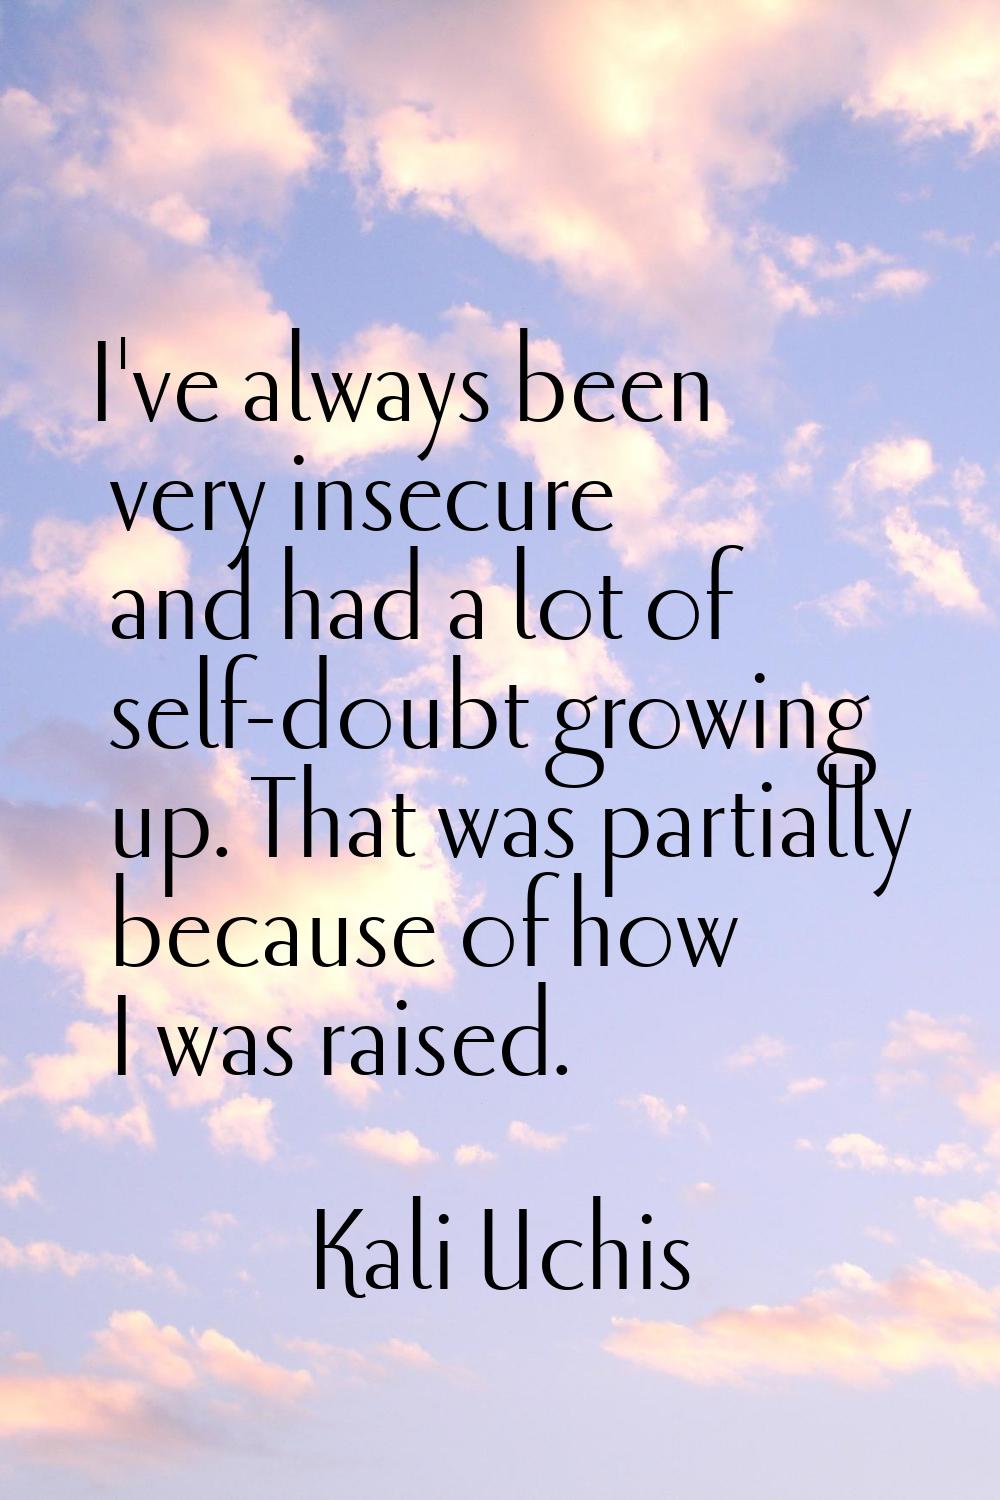 I've always been very insecure and had a lot of self-doubt growing up. That was partially because o